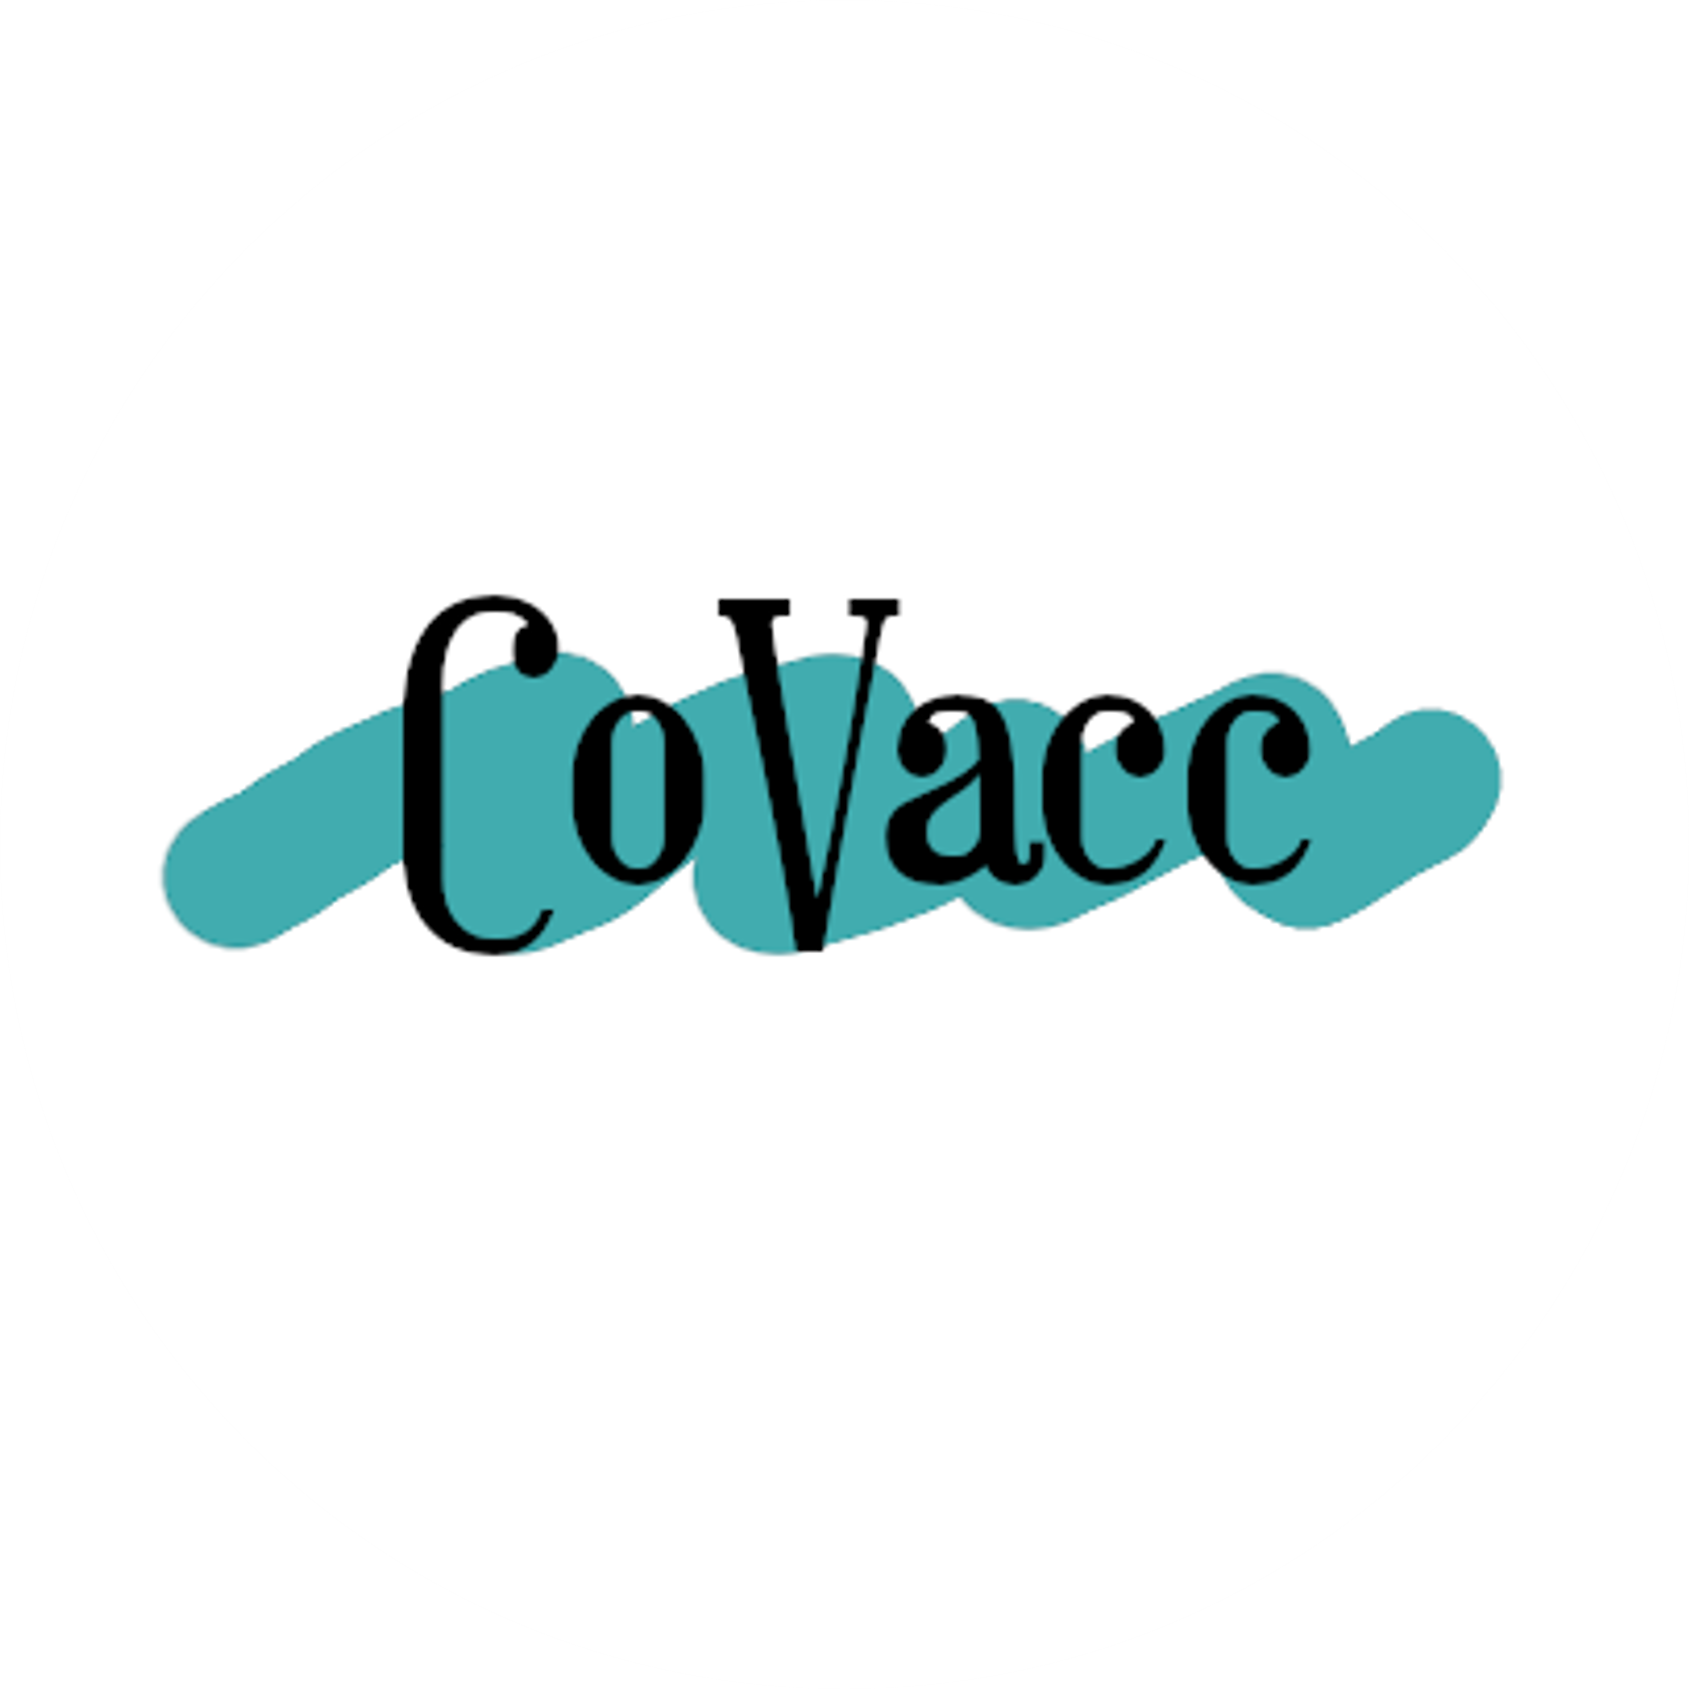 Covacc study logo Your Research